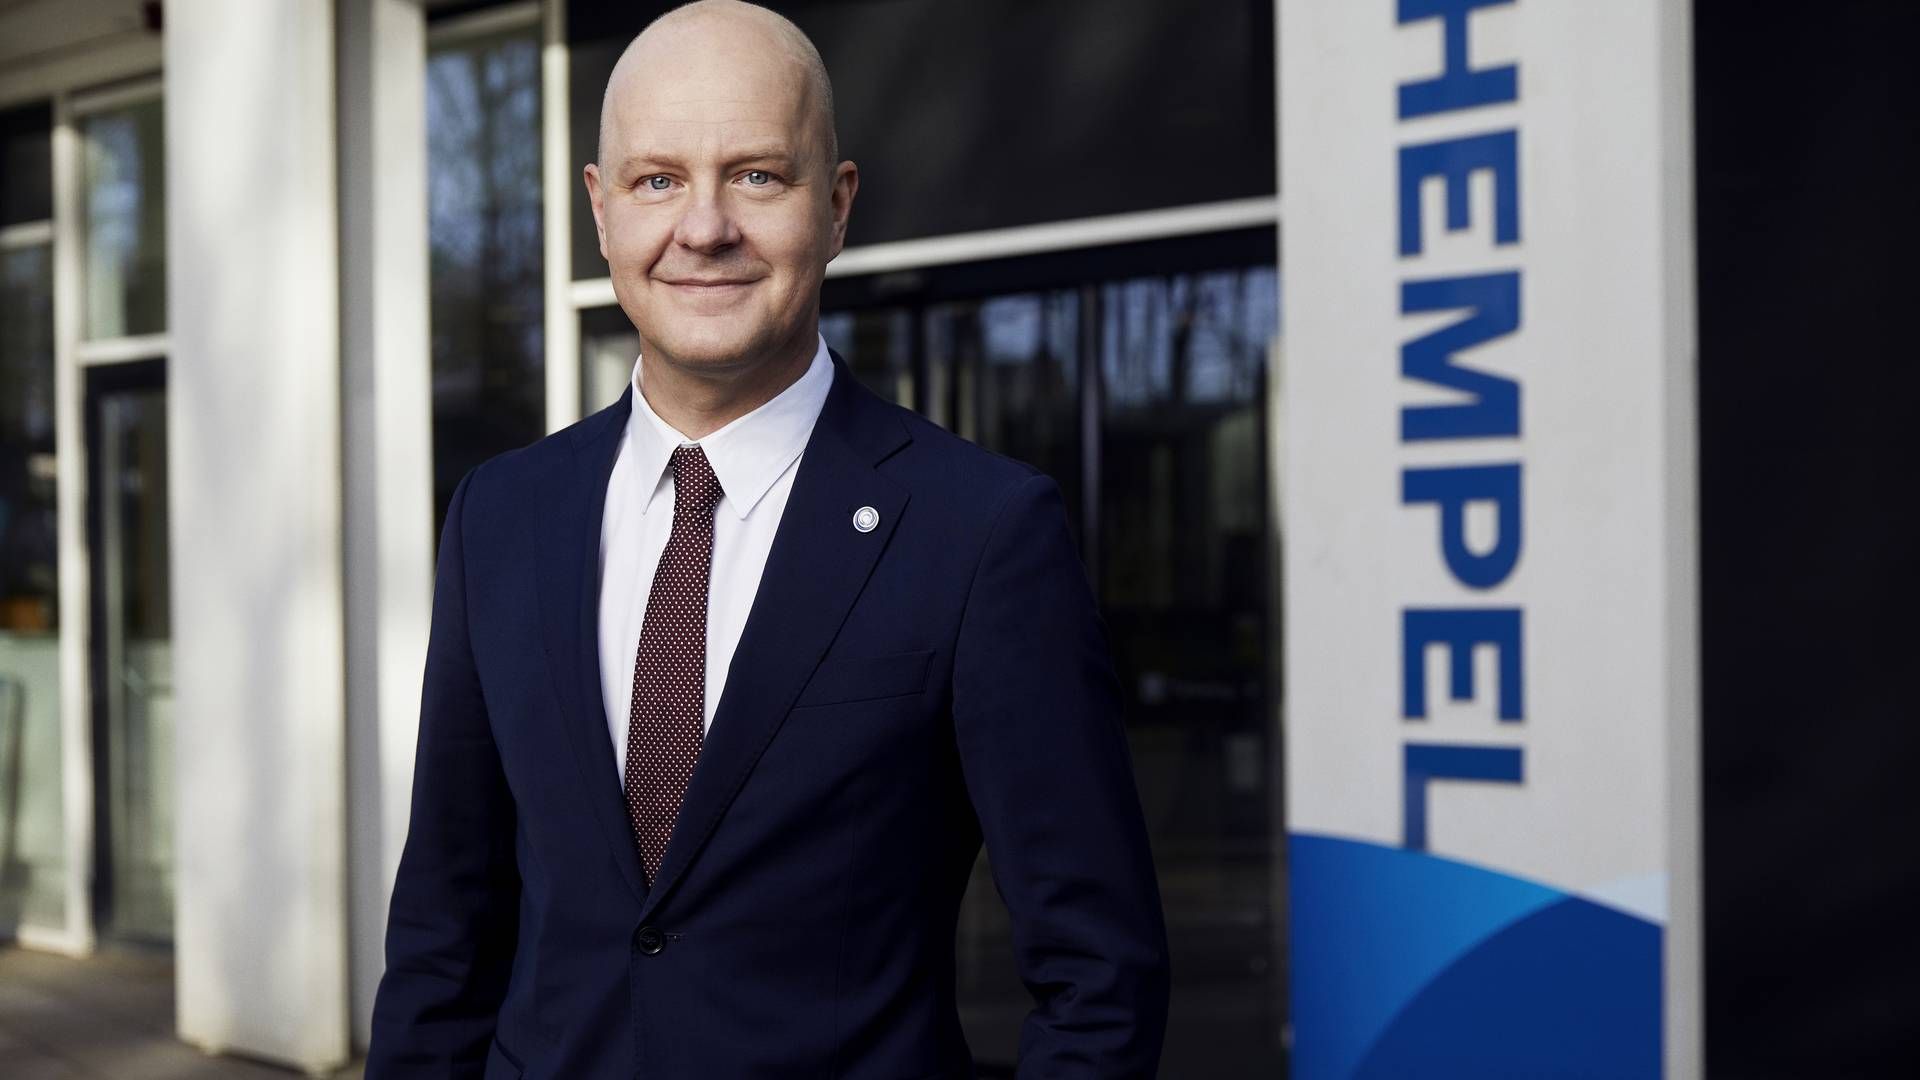 Lars Pettersson is CEO of Hempel, which has just acquired company Wattyl. | Photo: PR-FOTO